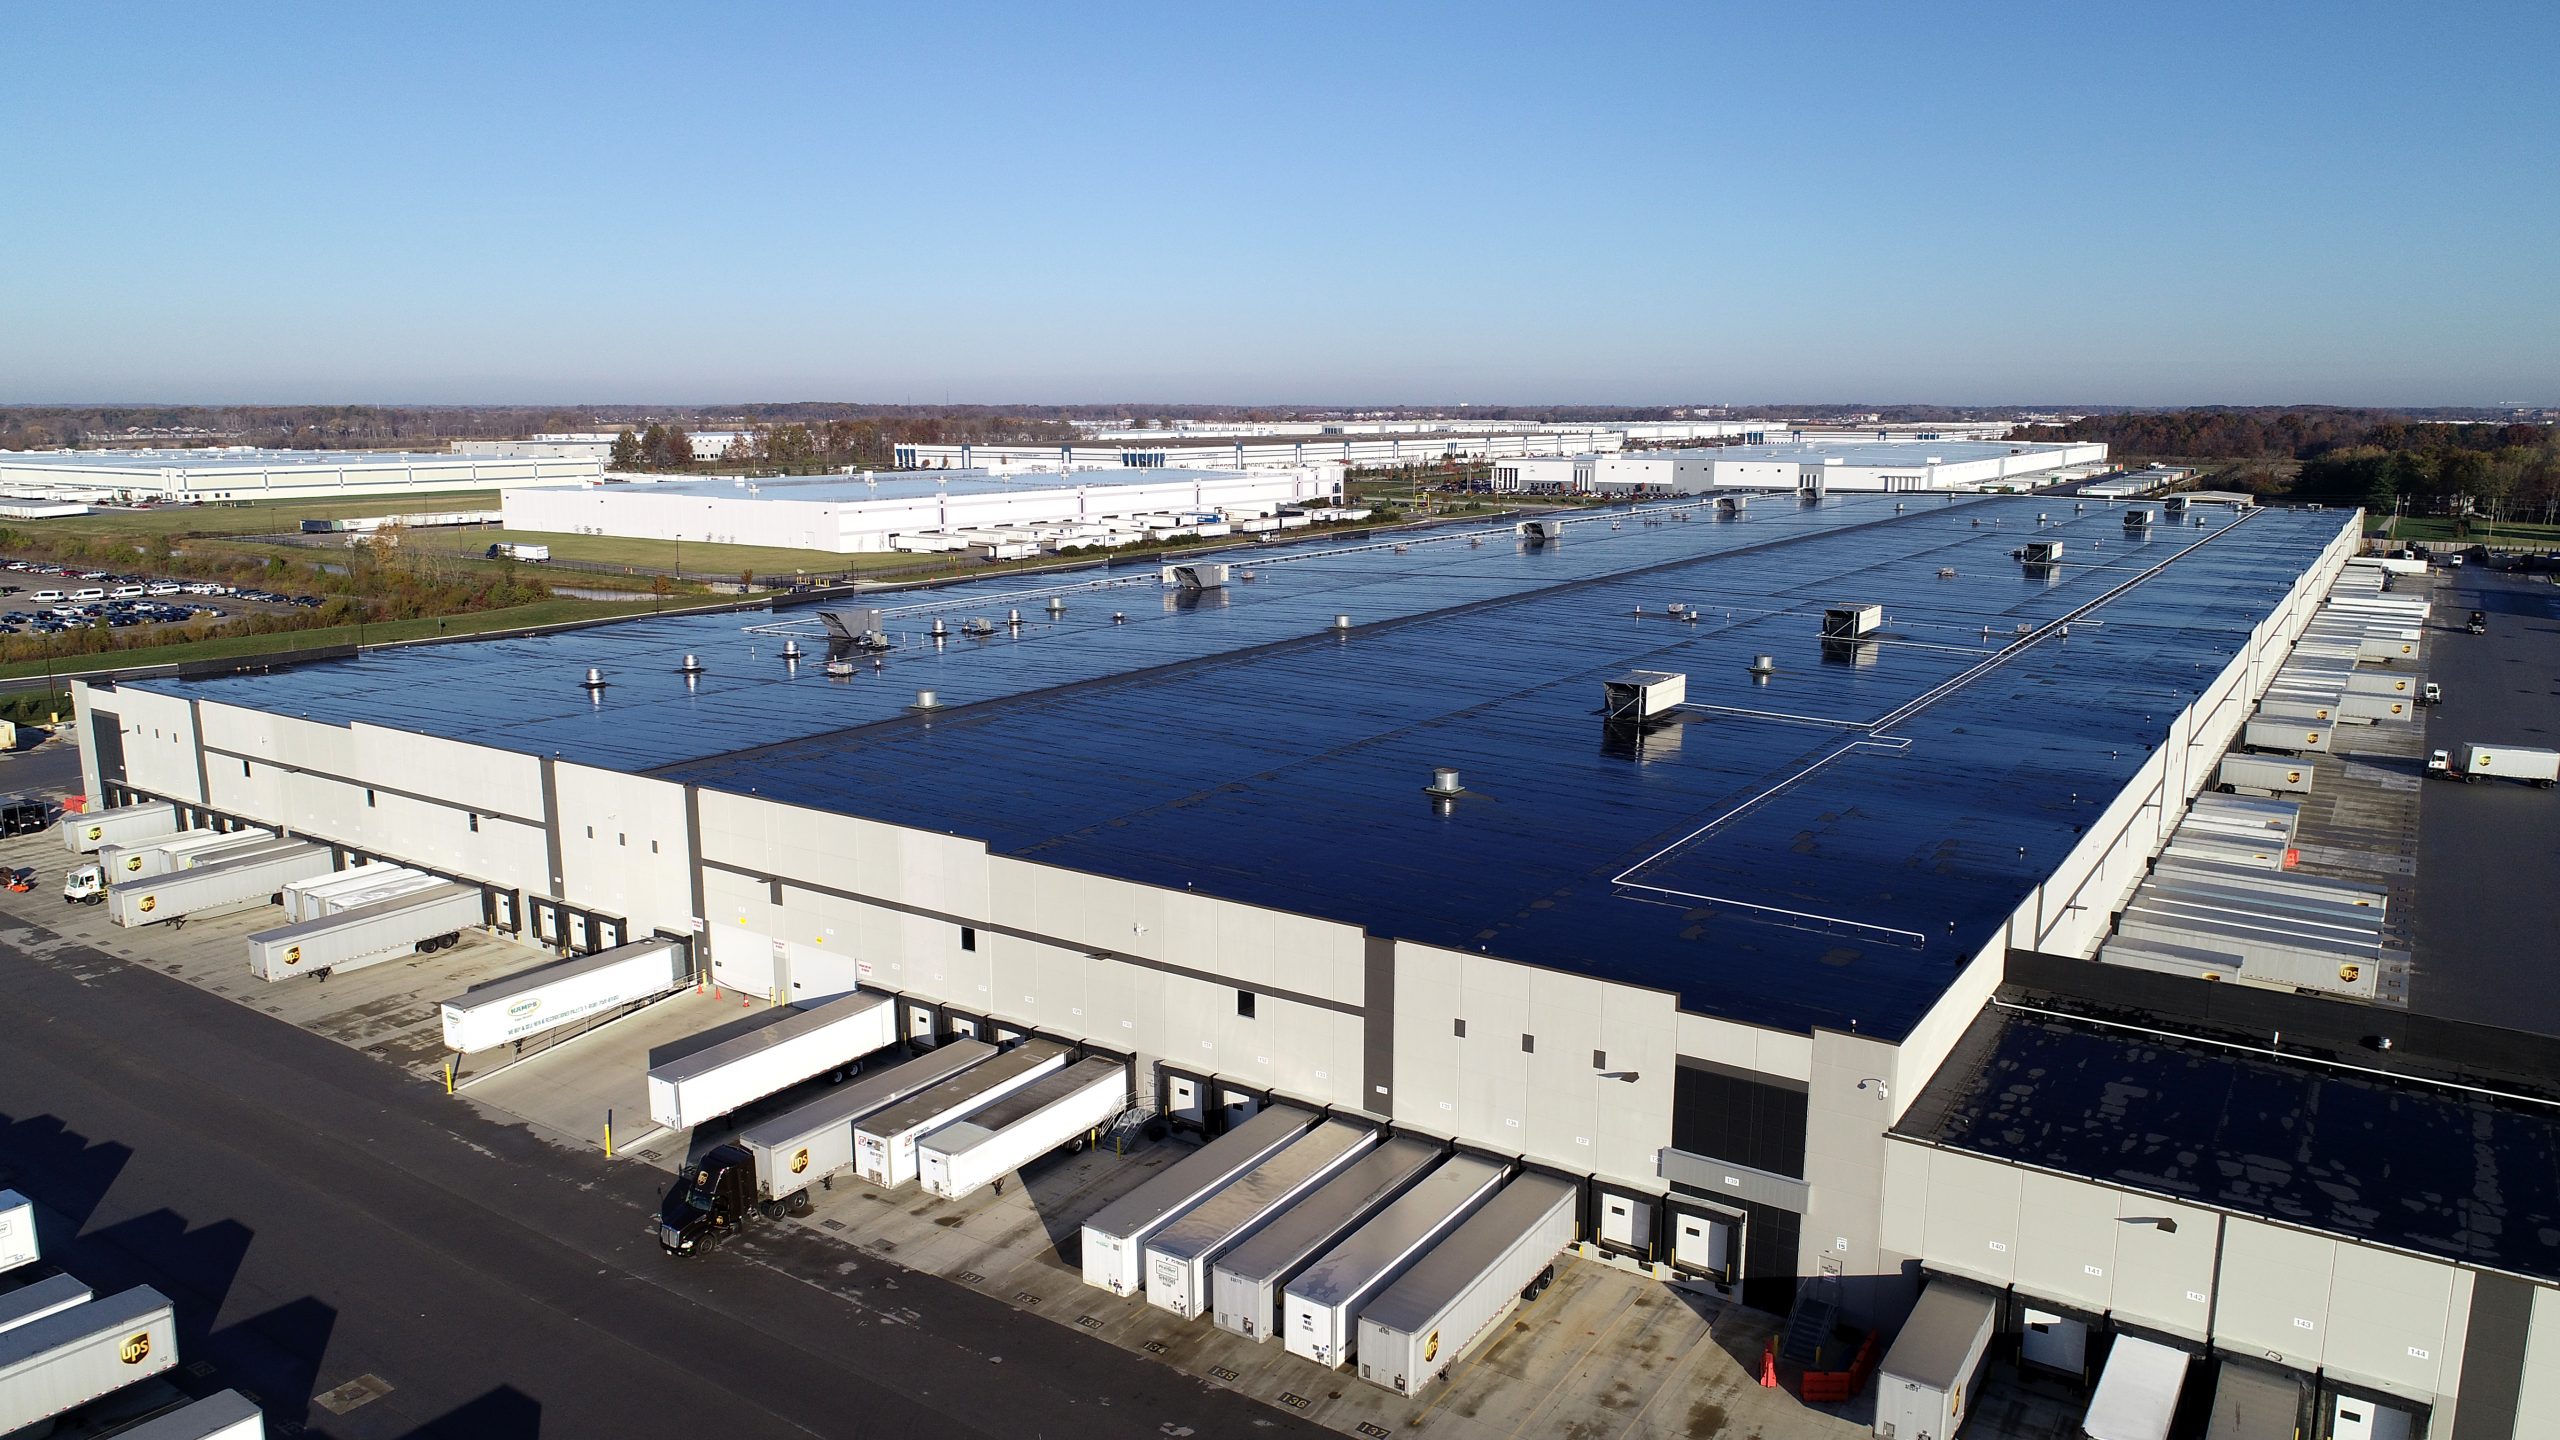 ups commercial roofing project by ce reeve roofing in indianapolis